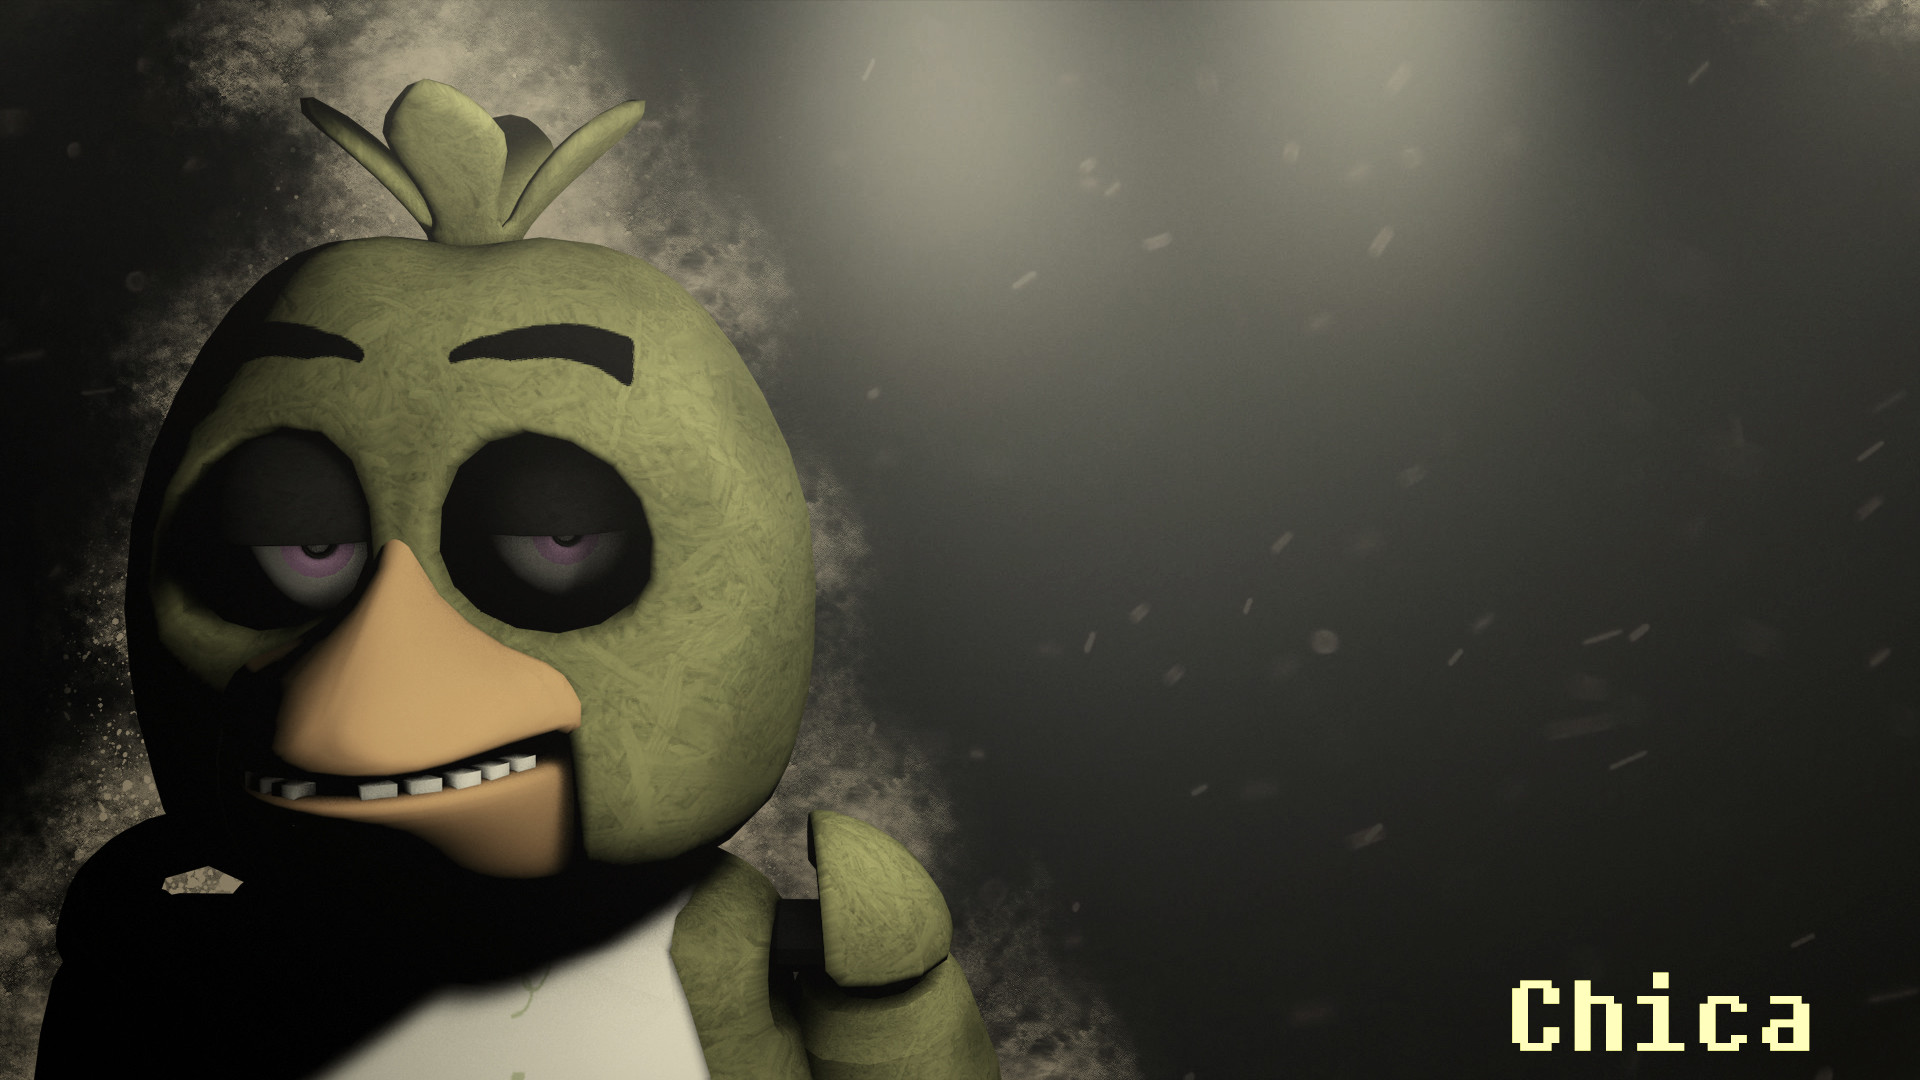 Five Nights at Freddys Chica Wallpaper DOWNLOAD by NiksonYT